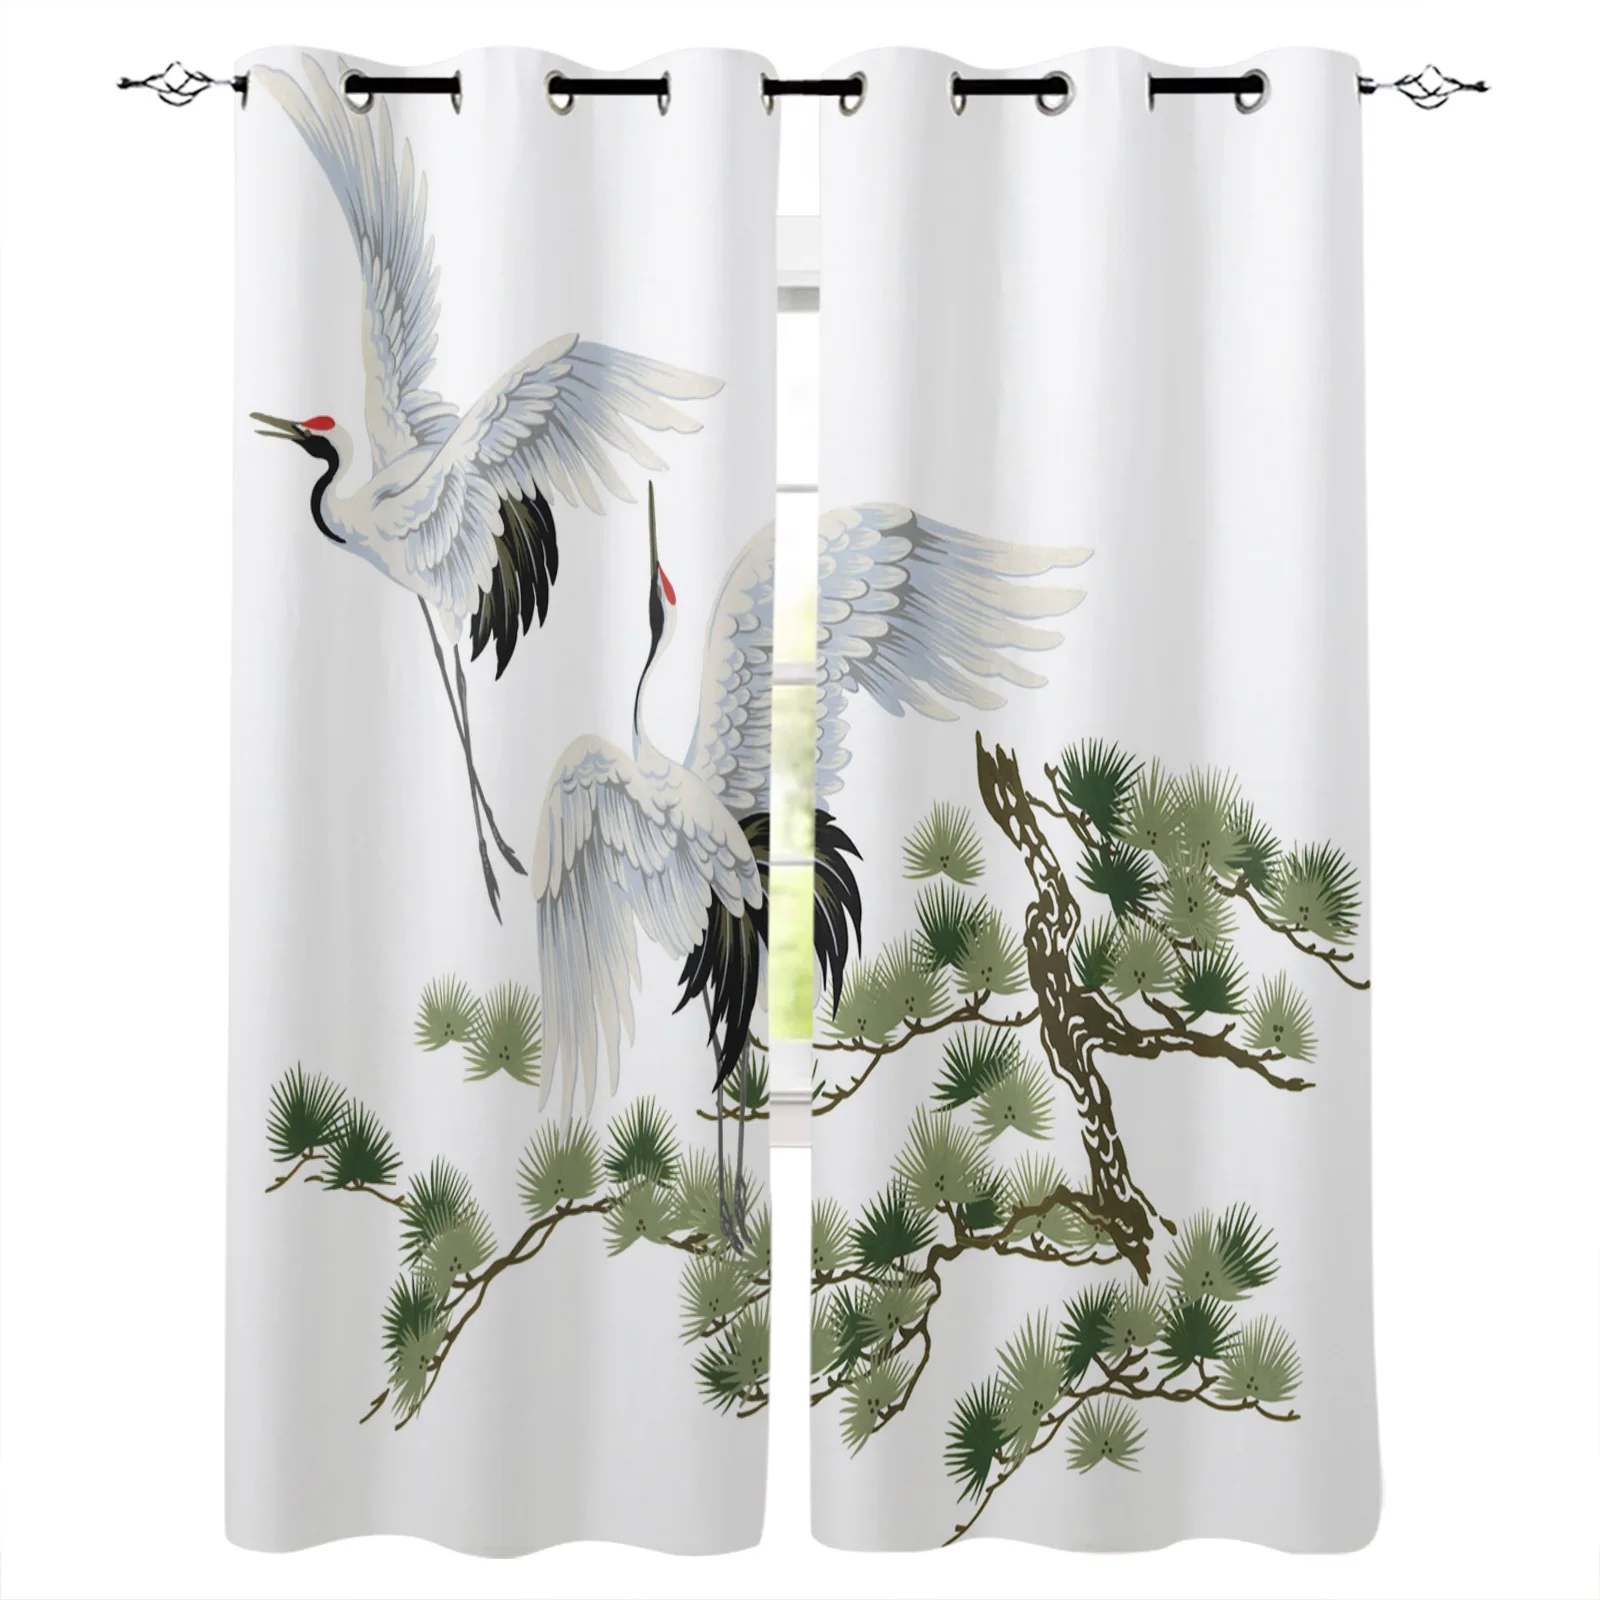 

White Crane Pine Tree Art Blackout Curtains Window Curtains For Bedroom Living Room Decor Window Treatments